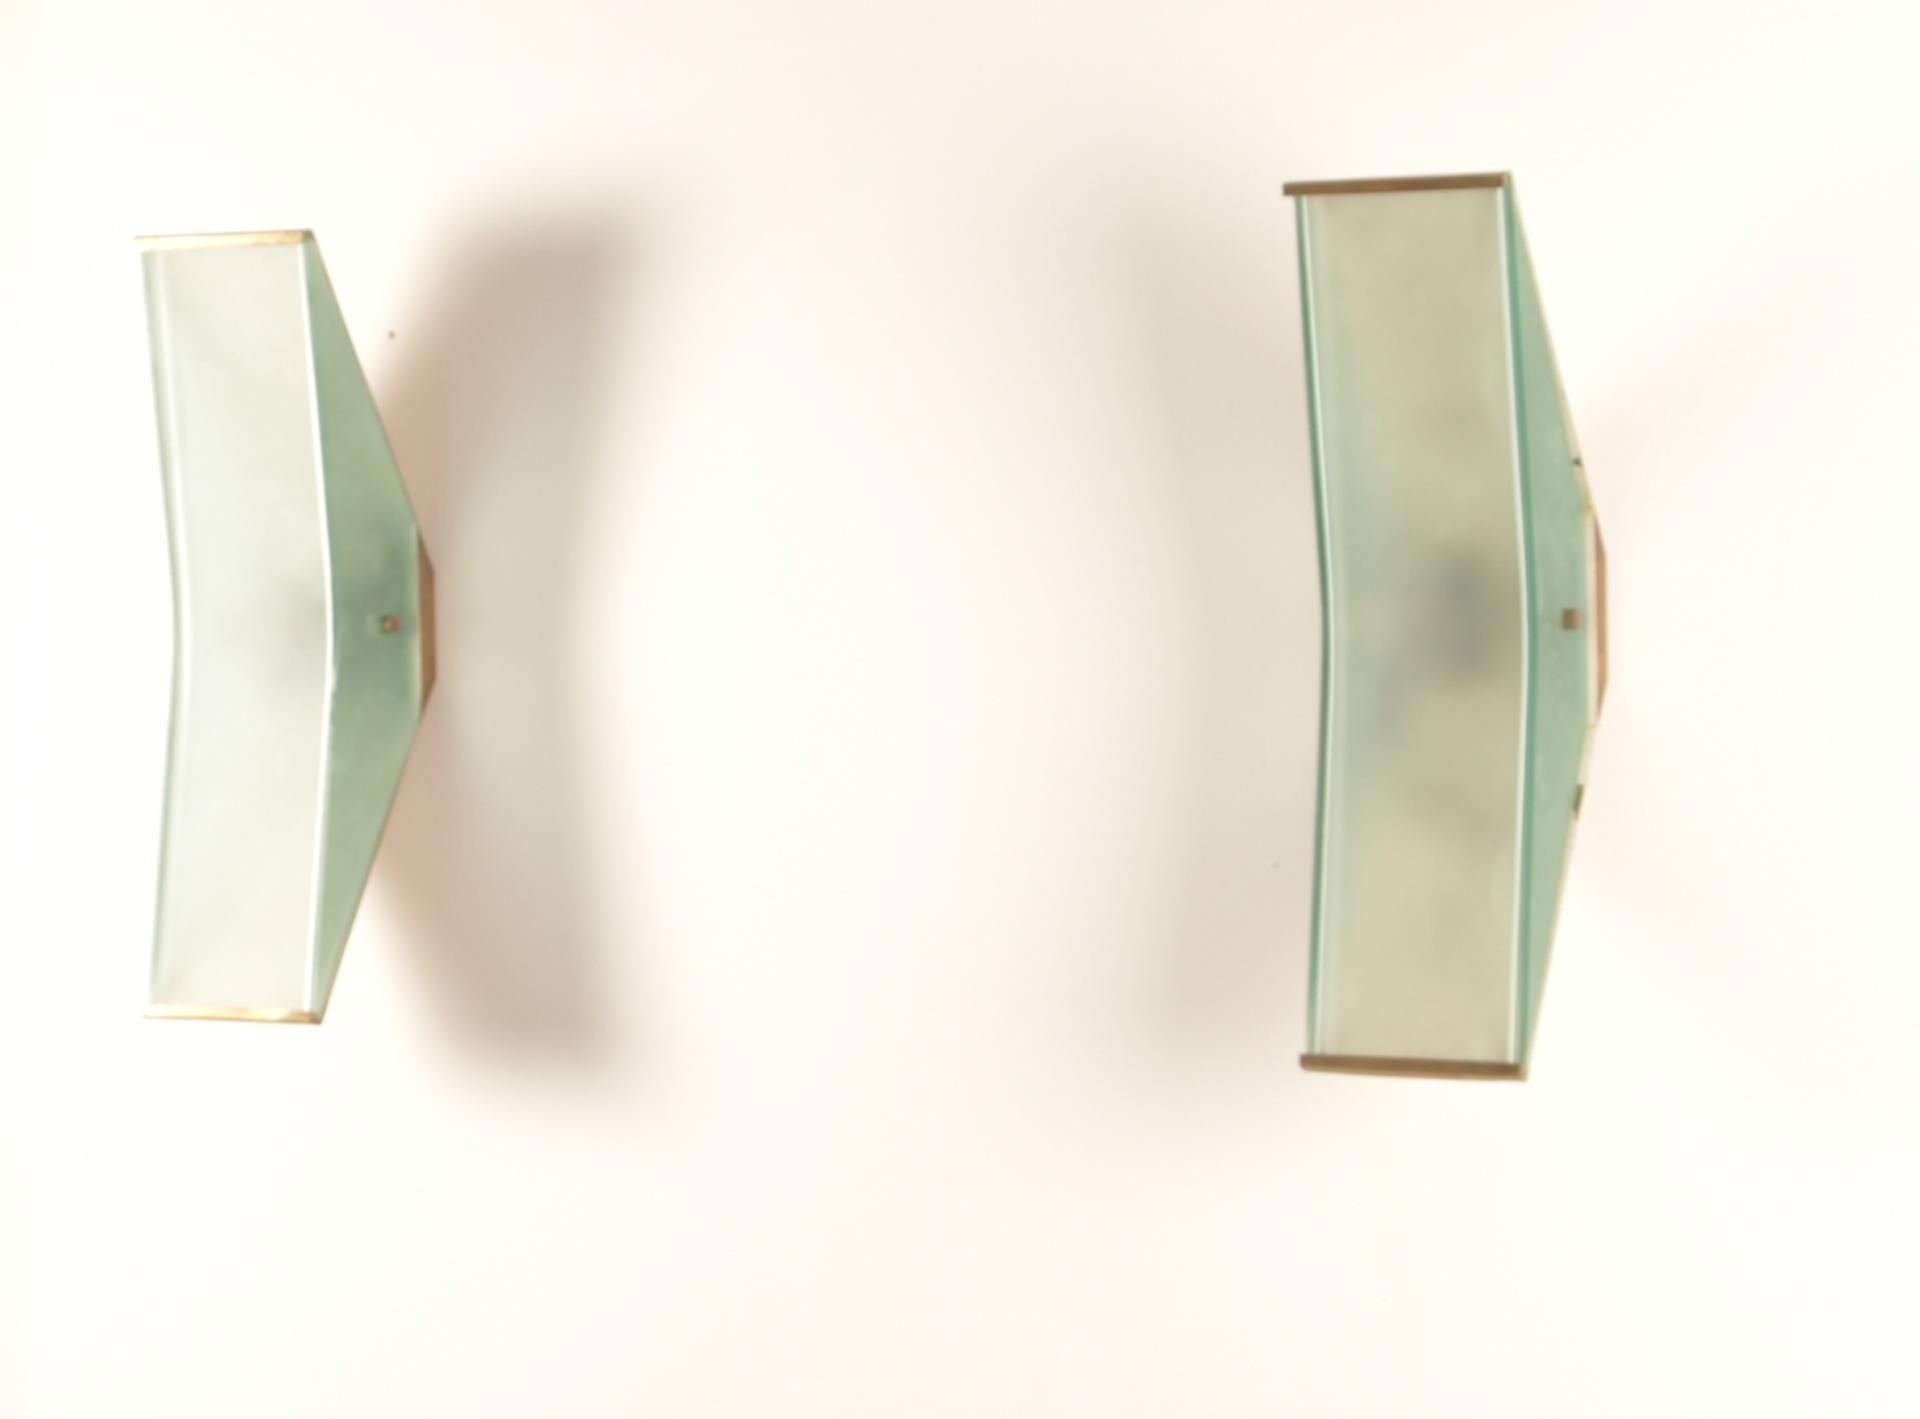 Wall lights, model no. 2135,1960s
Opaque glass, opaque colored glass, brass.
Manufactured by Fontana Arte, Milan, Italy.